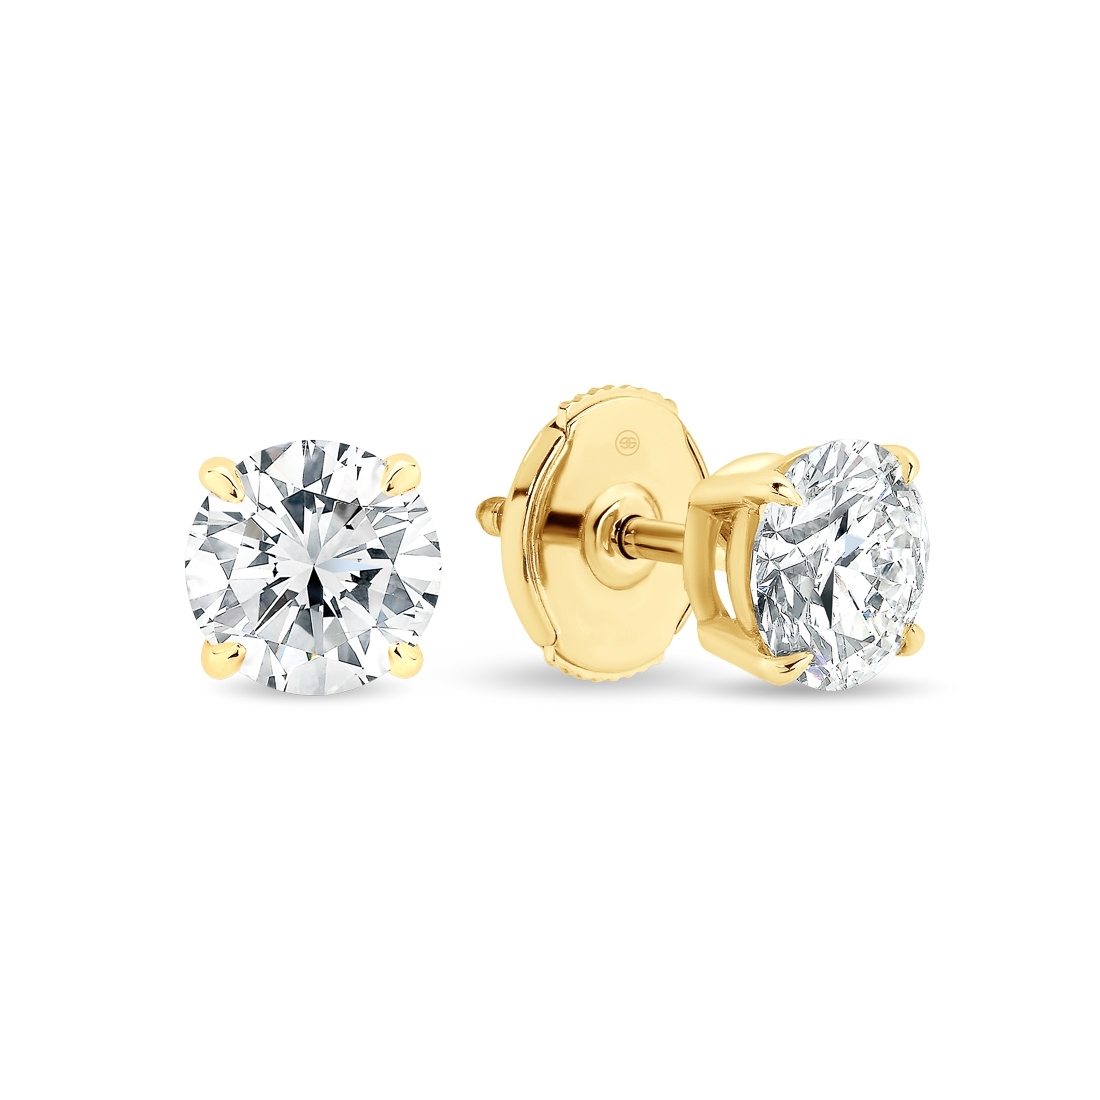 Gregory Classic Earrings 0.40ct Yellow Gold - K26-0.40 YG